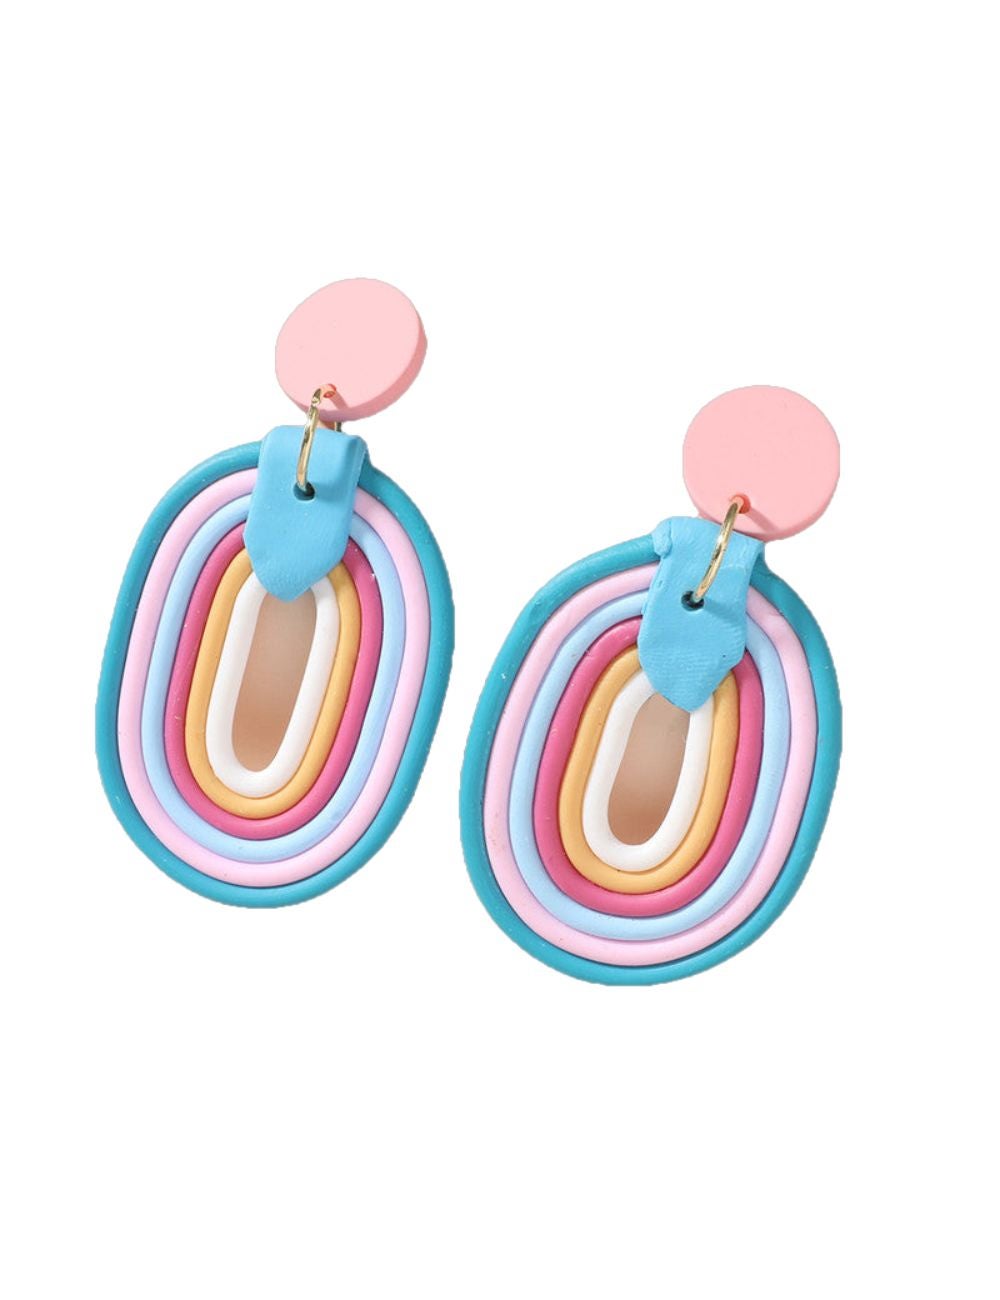 Adorable Moshie Sugarly Collection Acrylic Earrings